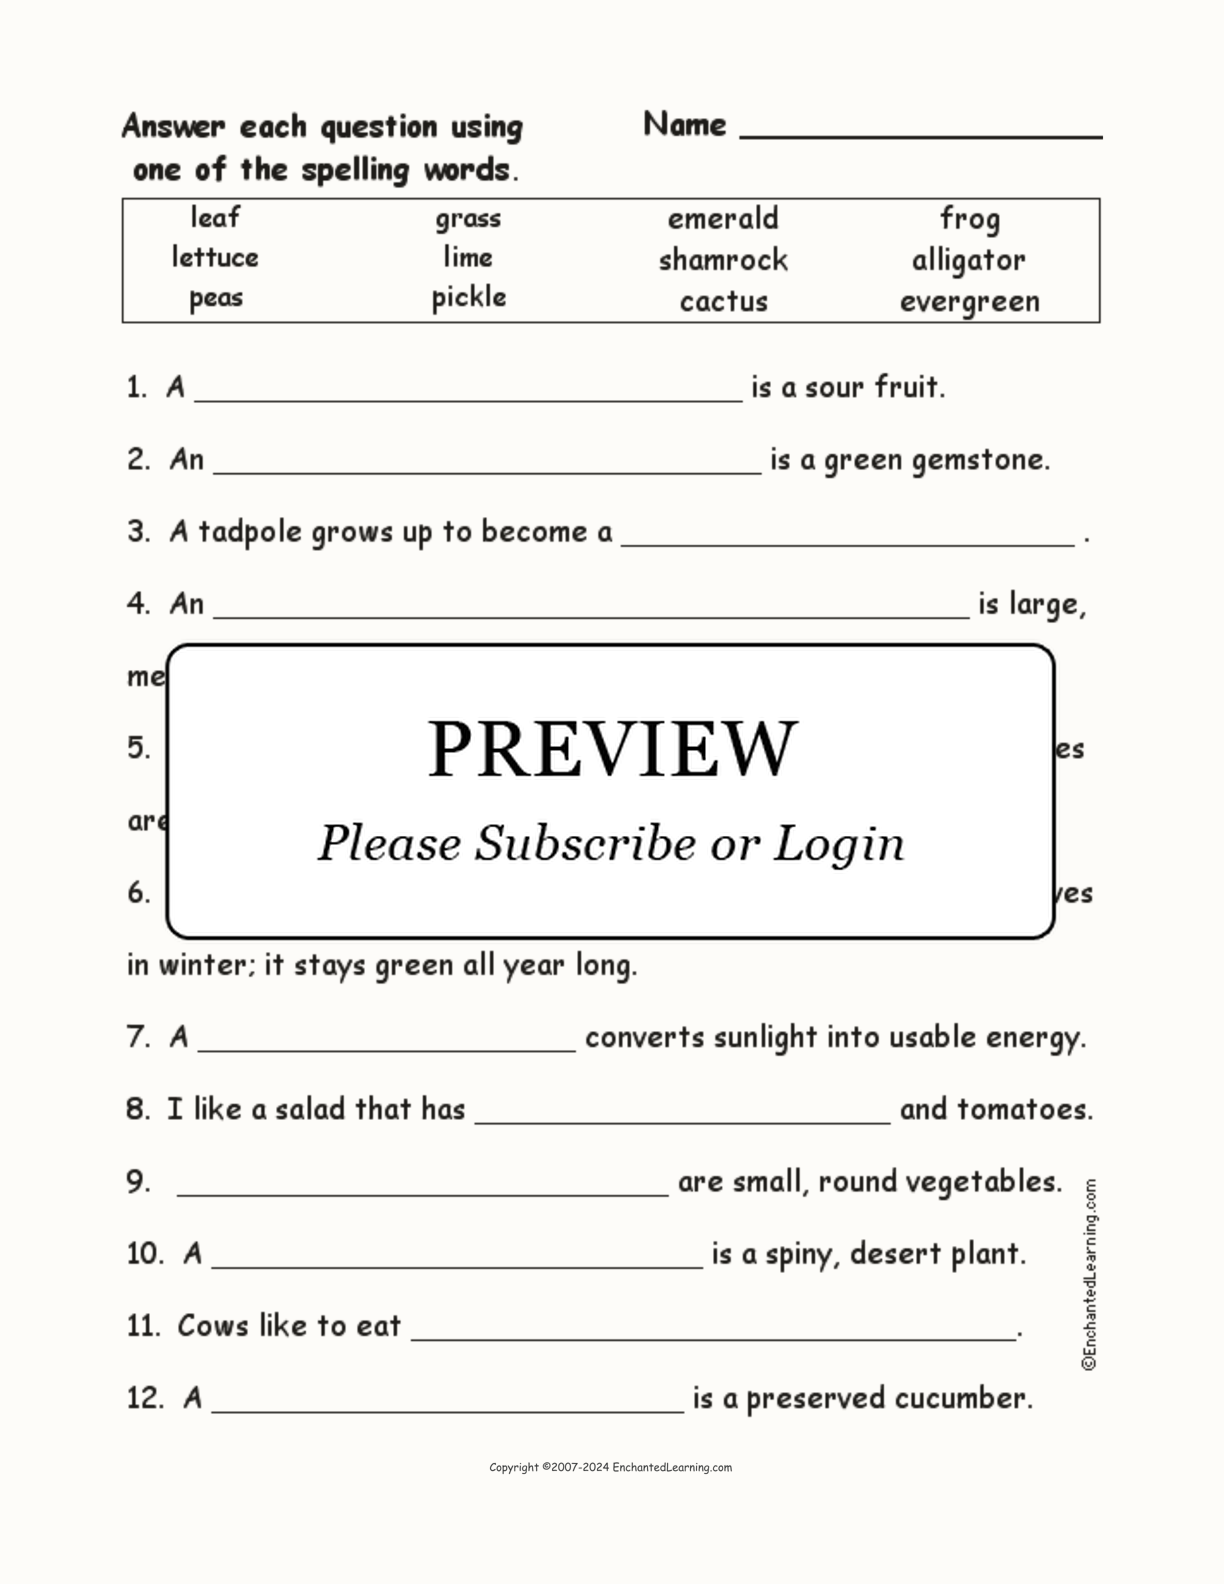 Spelling Word Questions: Green Things interactive worksheet page 1